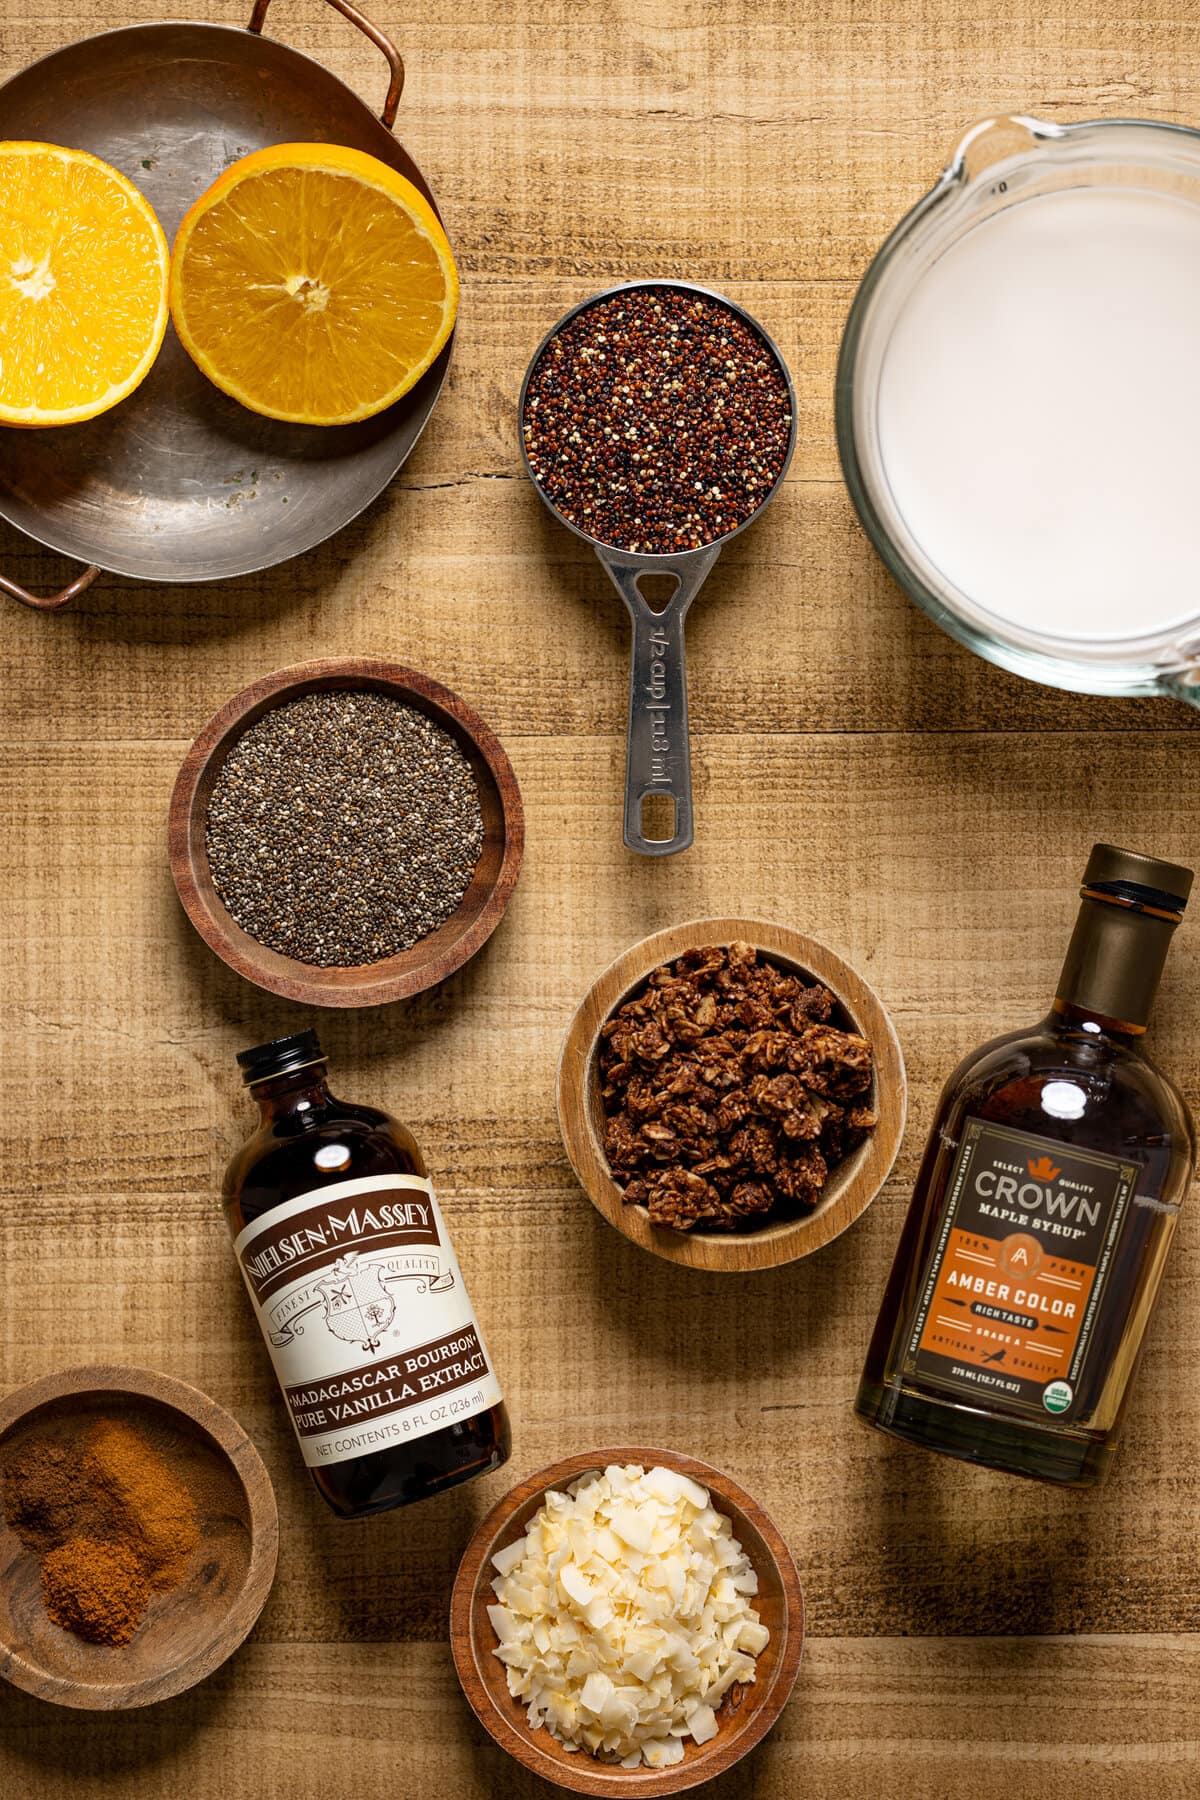 Ingredients for Winter Quinoa Breakfast Bowl including maple syrup, vanilla extract, and seasonings